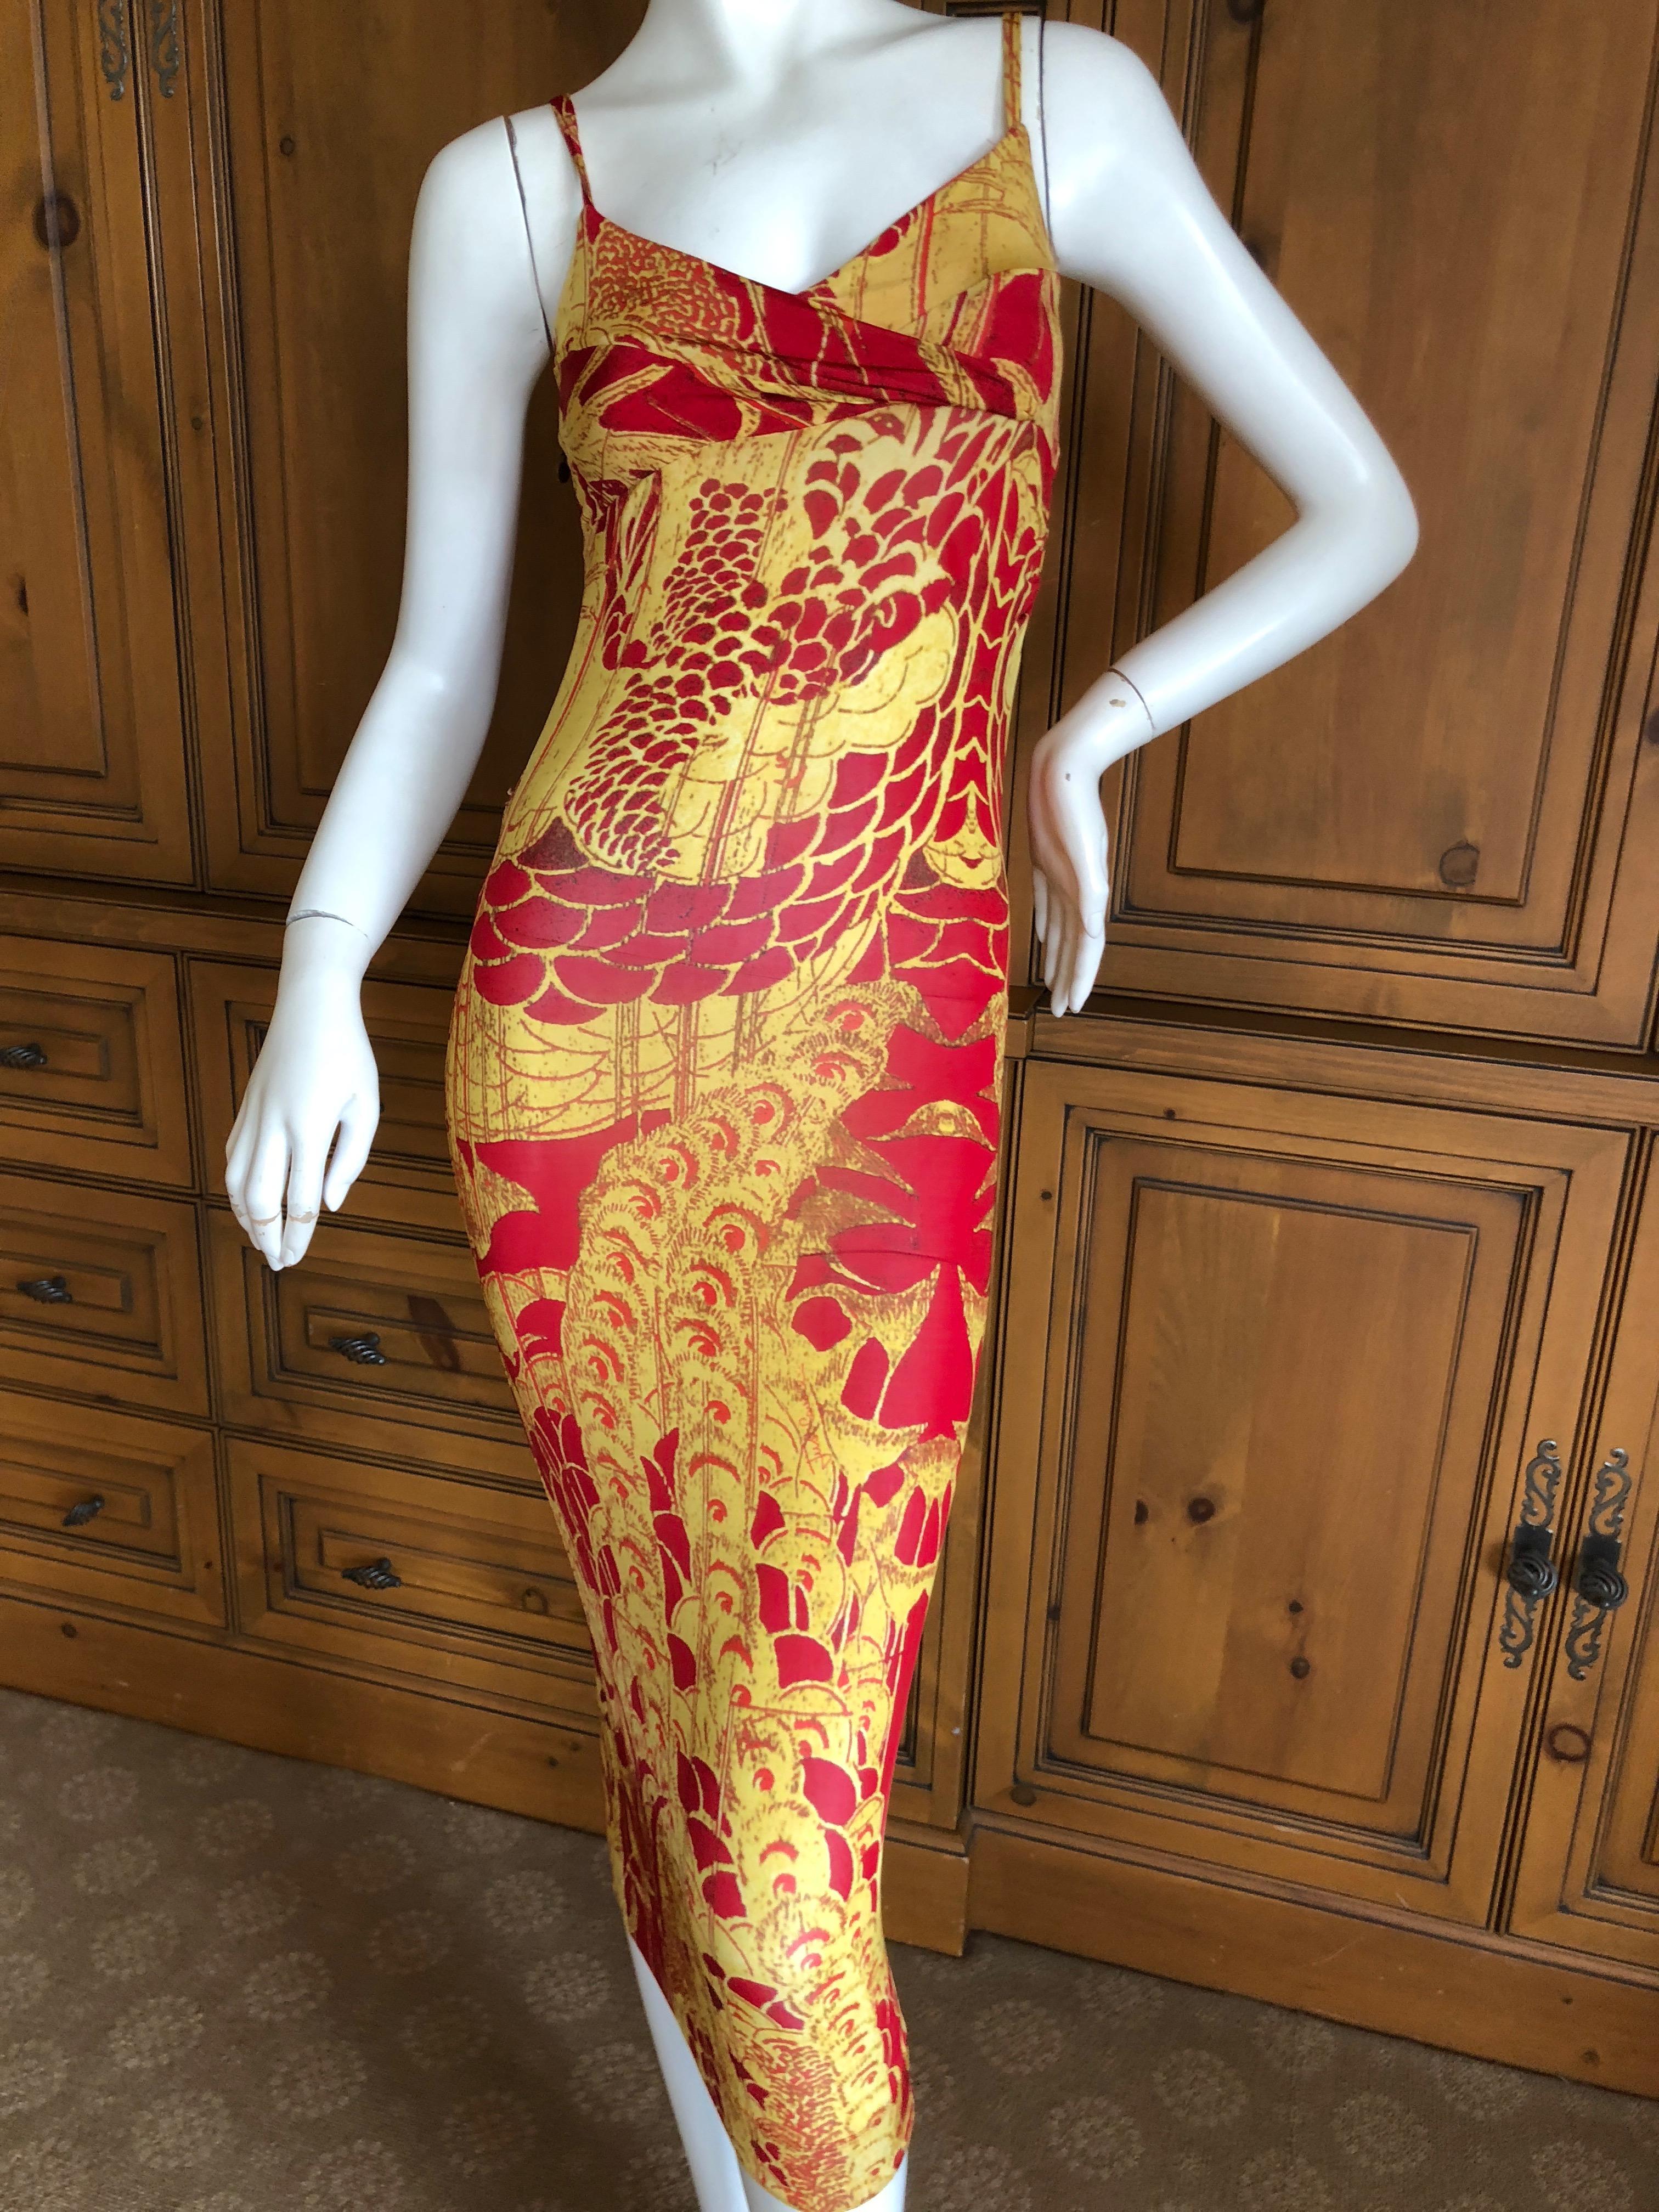 Roberto Cavalli Just Cavalli Vintage Aubrey Beardsley Salome Peacock Print Dress In Excellent Condition For Sale In Cloverdale, CA